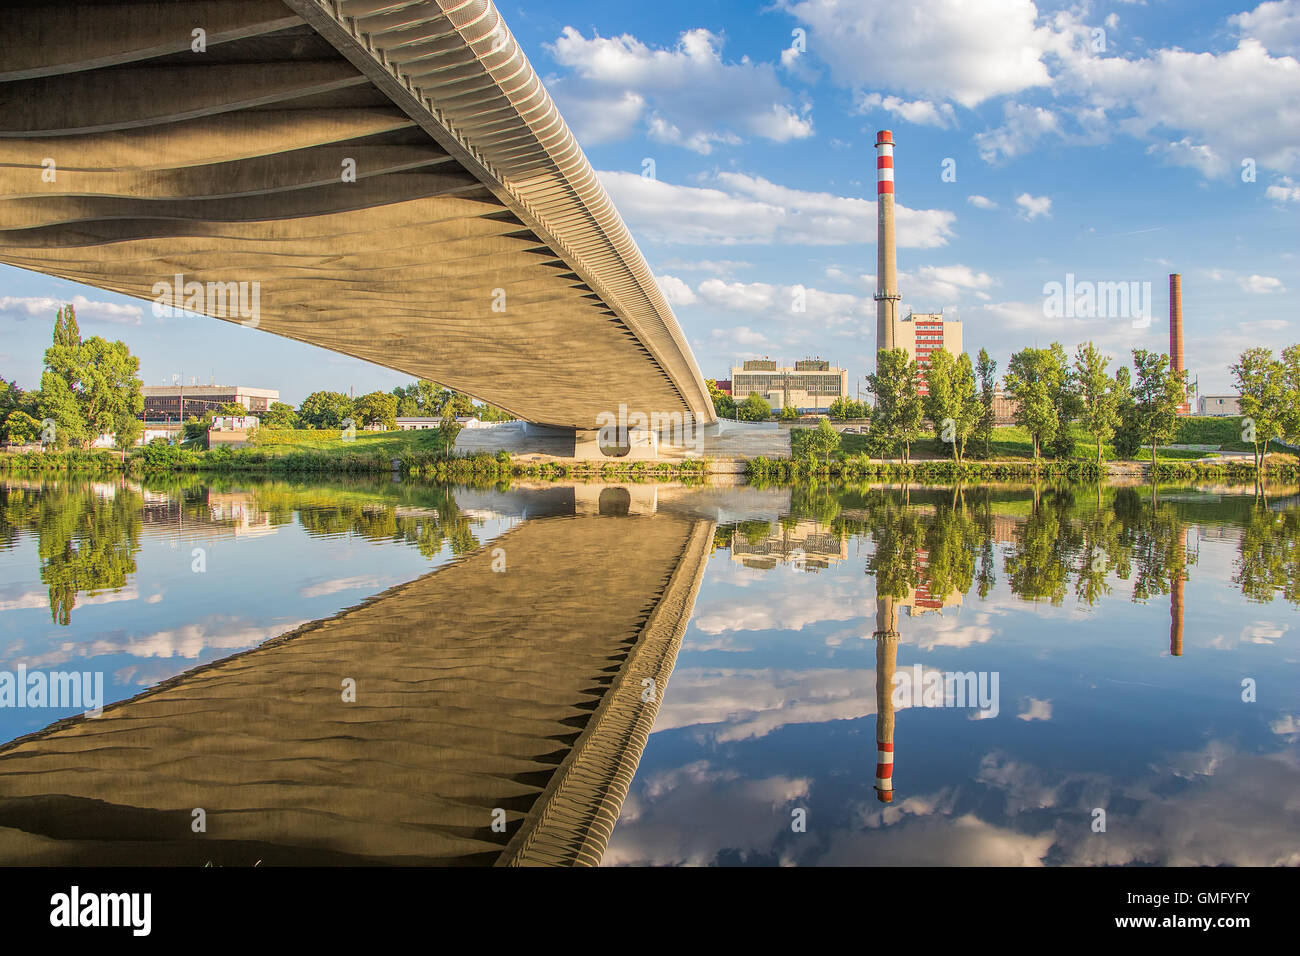 Industrial area of Prague. Chimneys, industrial buildings, clear sky, clouds, bridge with reflection on Prague river Vltava. Stock Photo